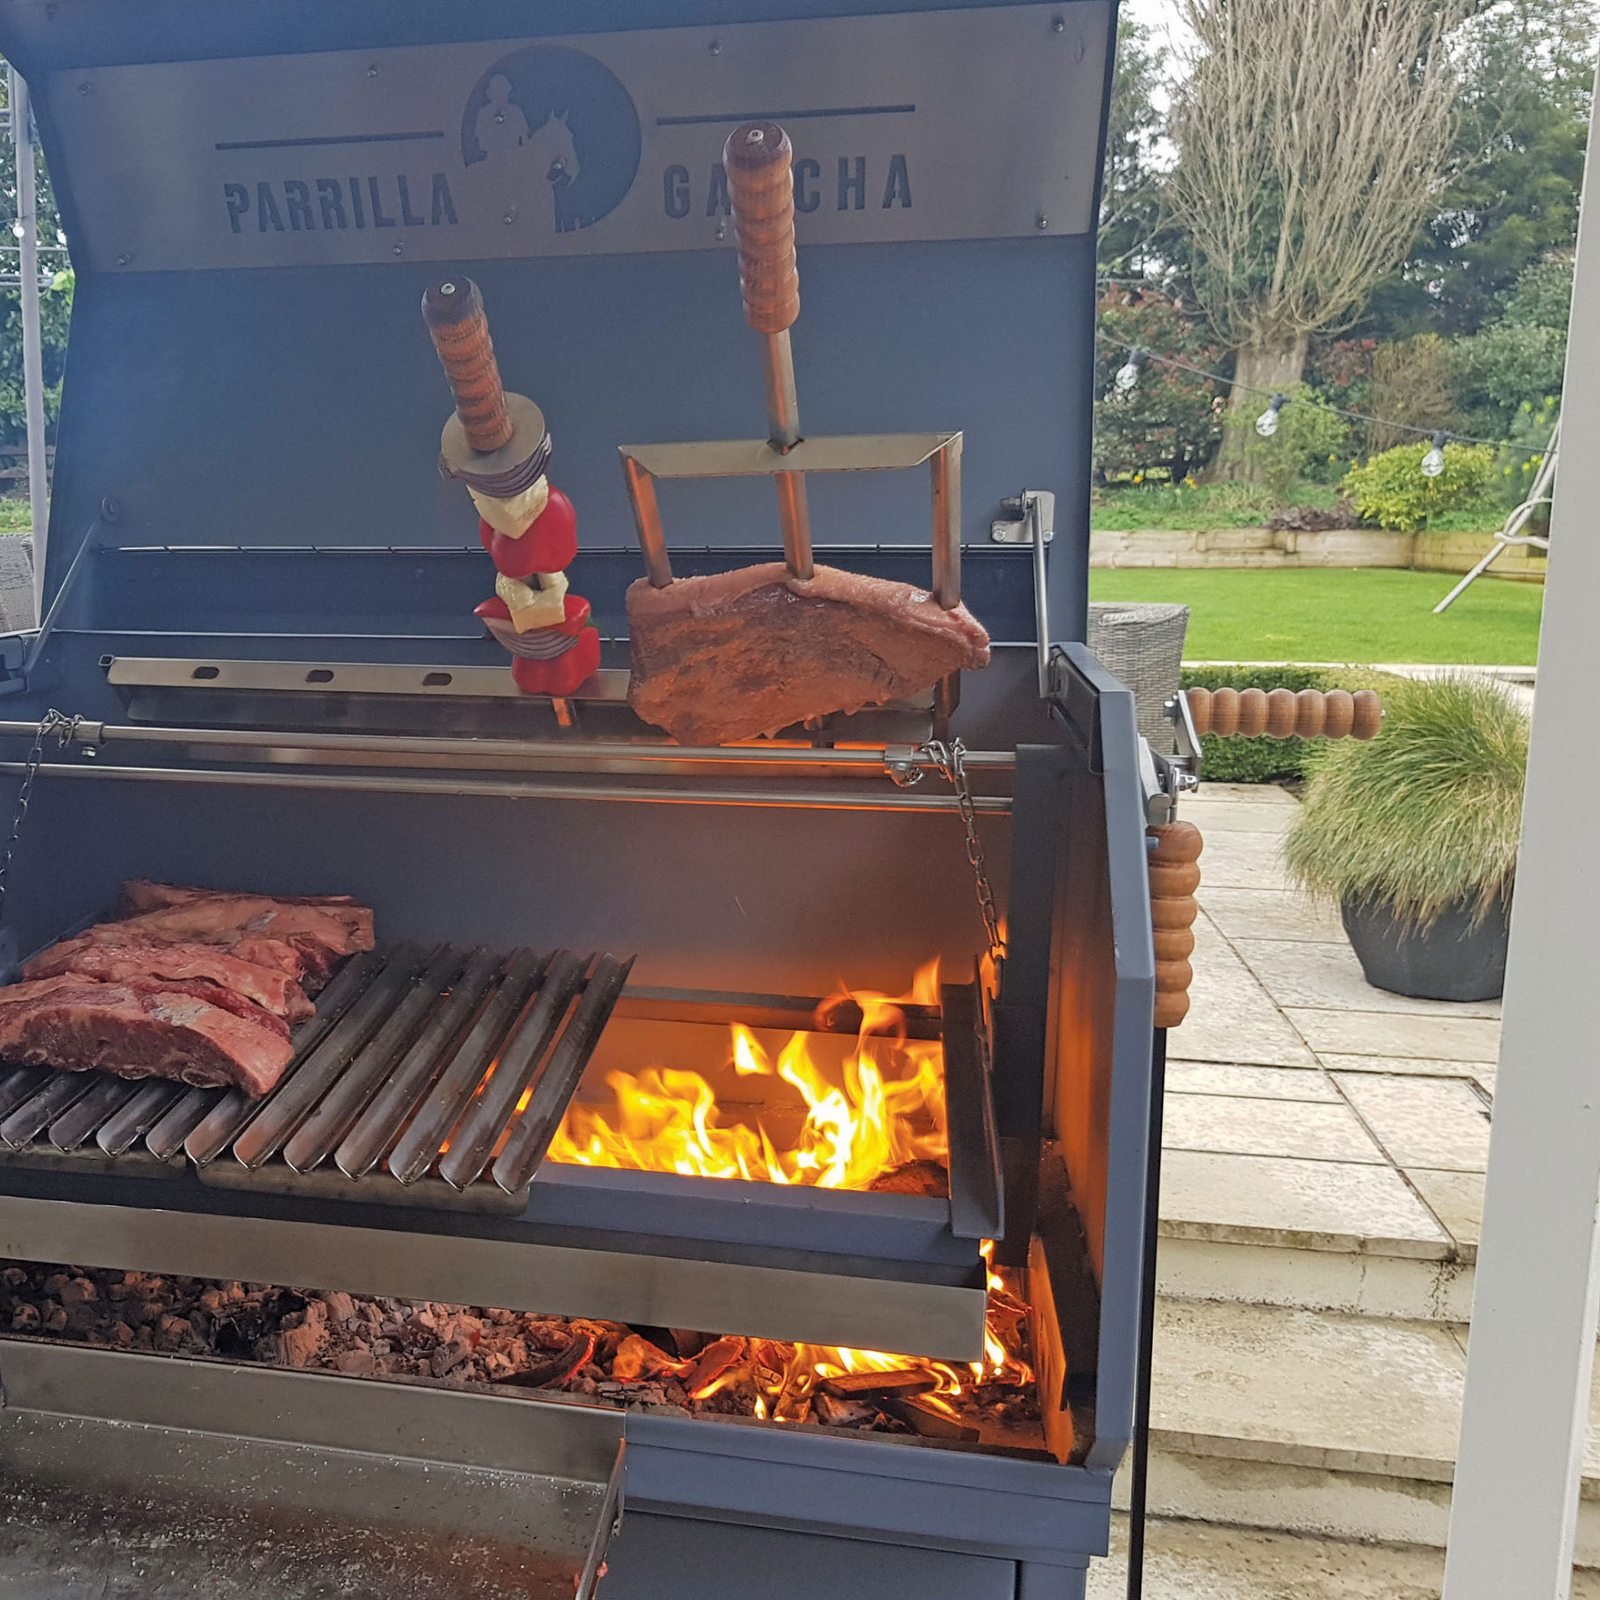 Premium Photo  Parrilla argentina traditional barbecue made with